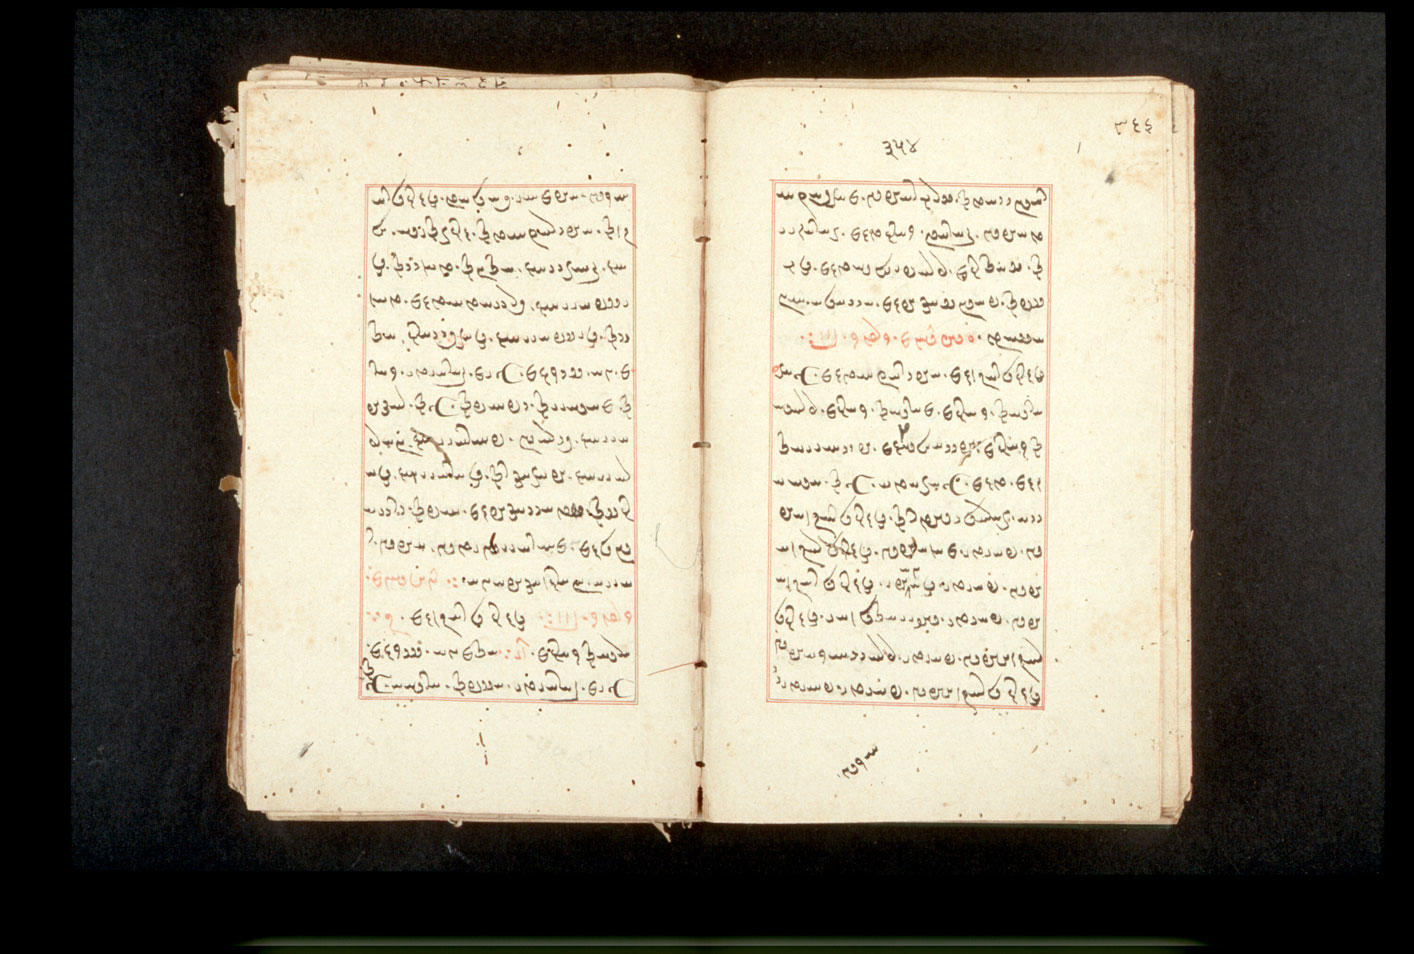 Folios 354v (right) and 355r (left)